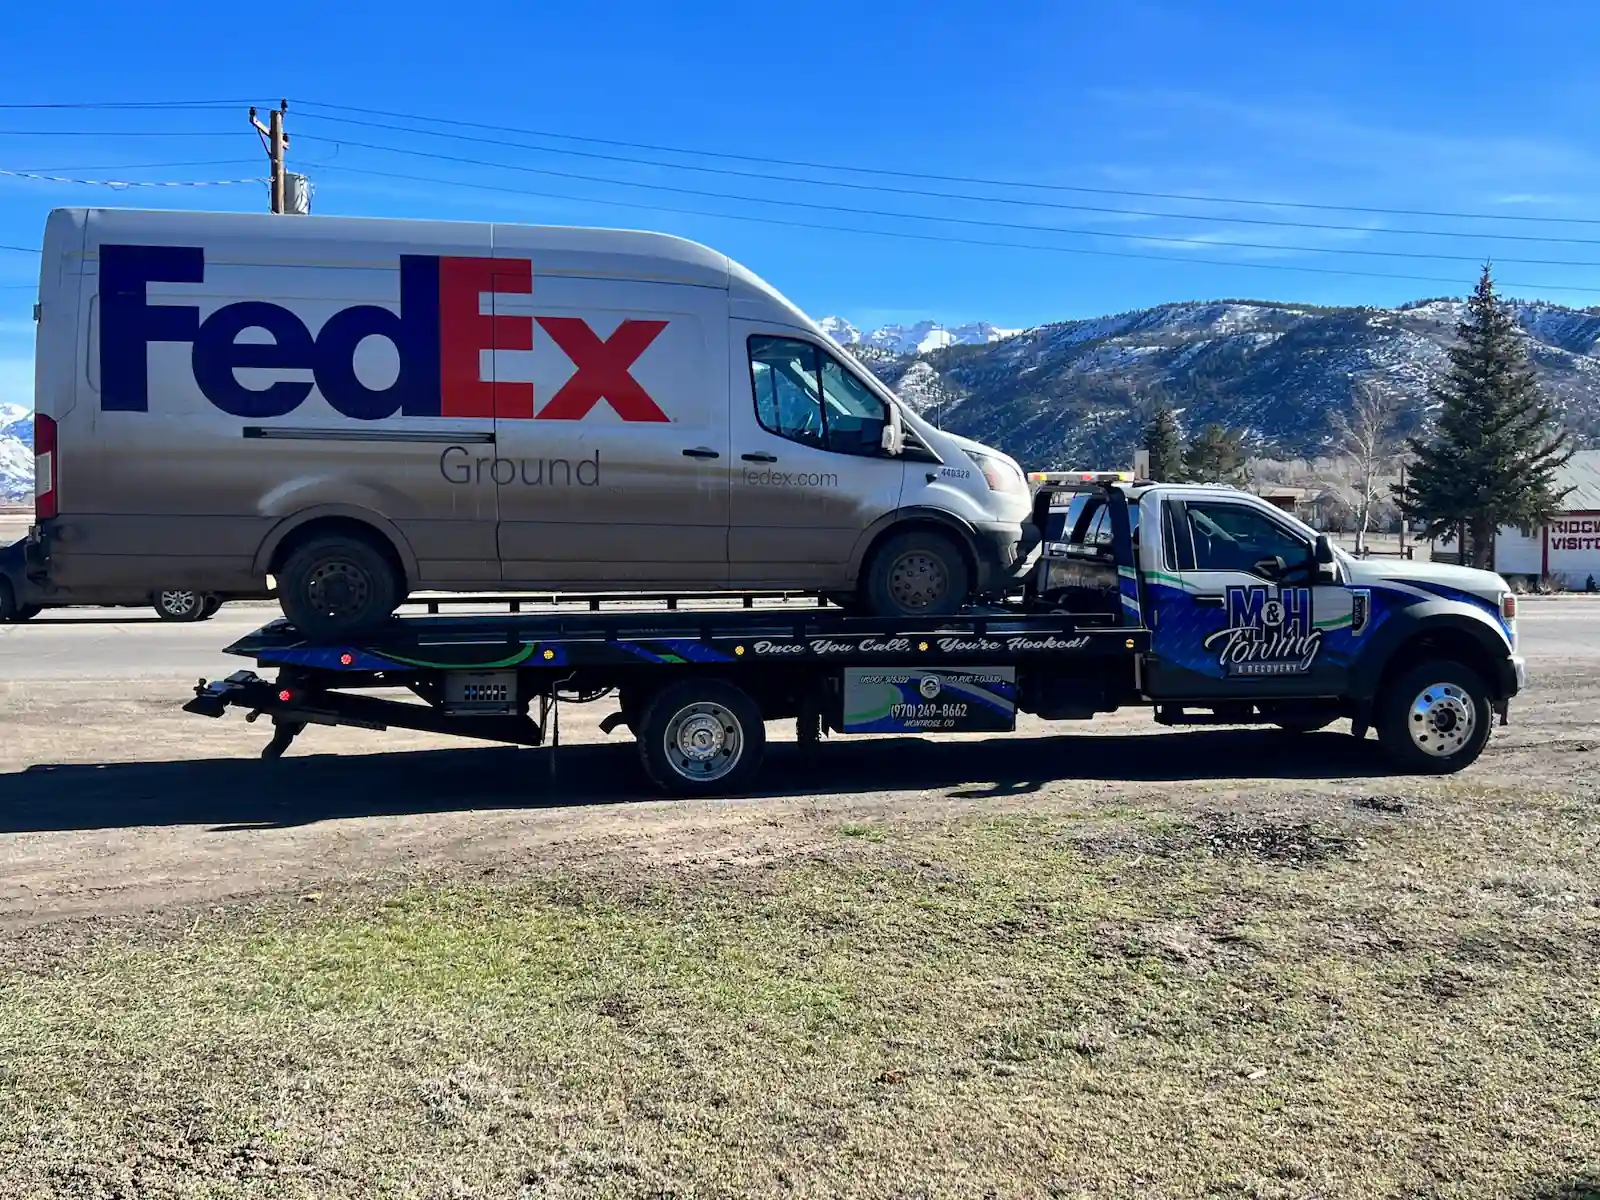 M&H Towing and Recovery towing a FedEx Truck that is broke down in Montrose, Colorado